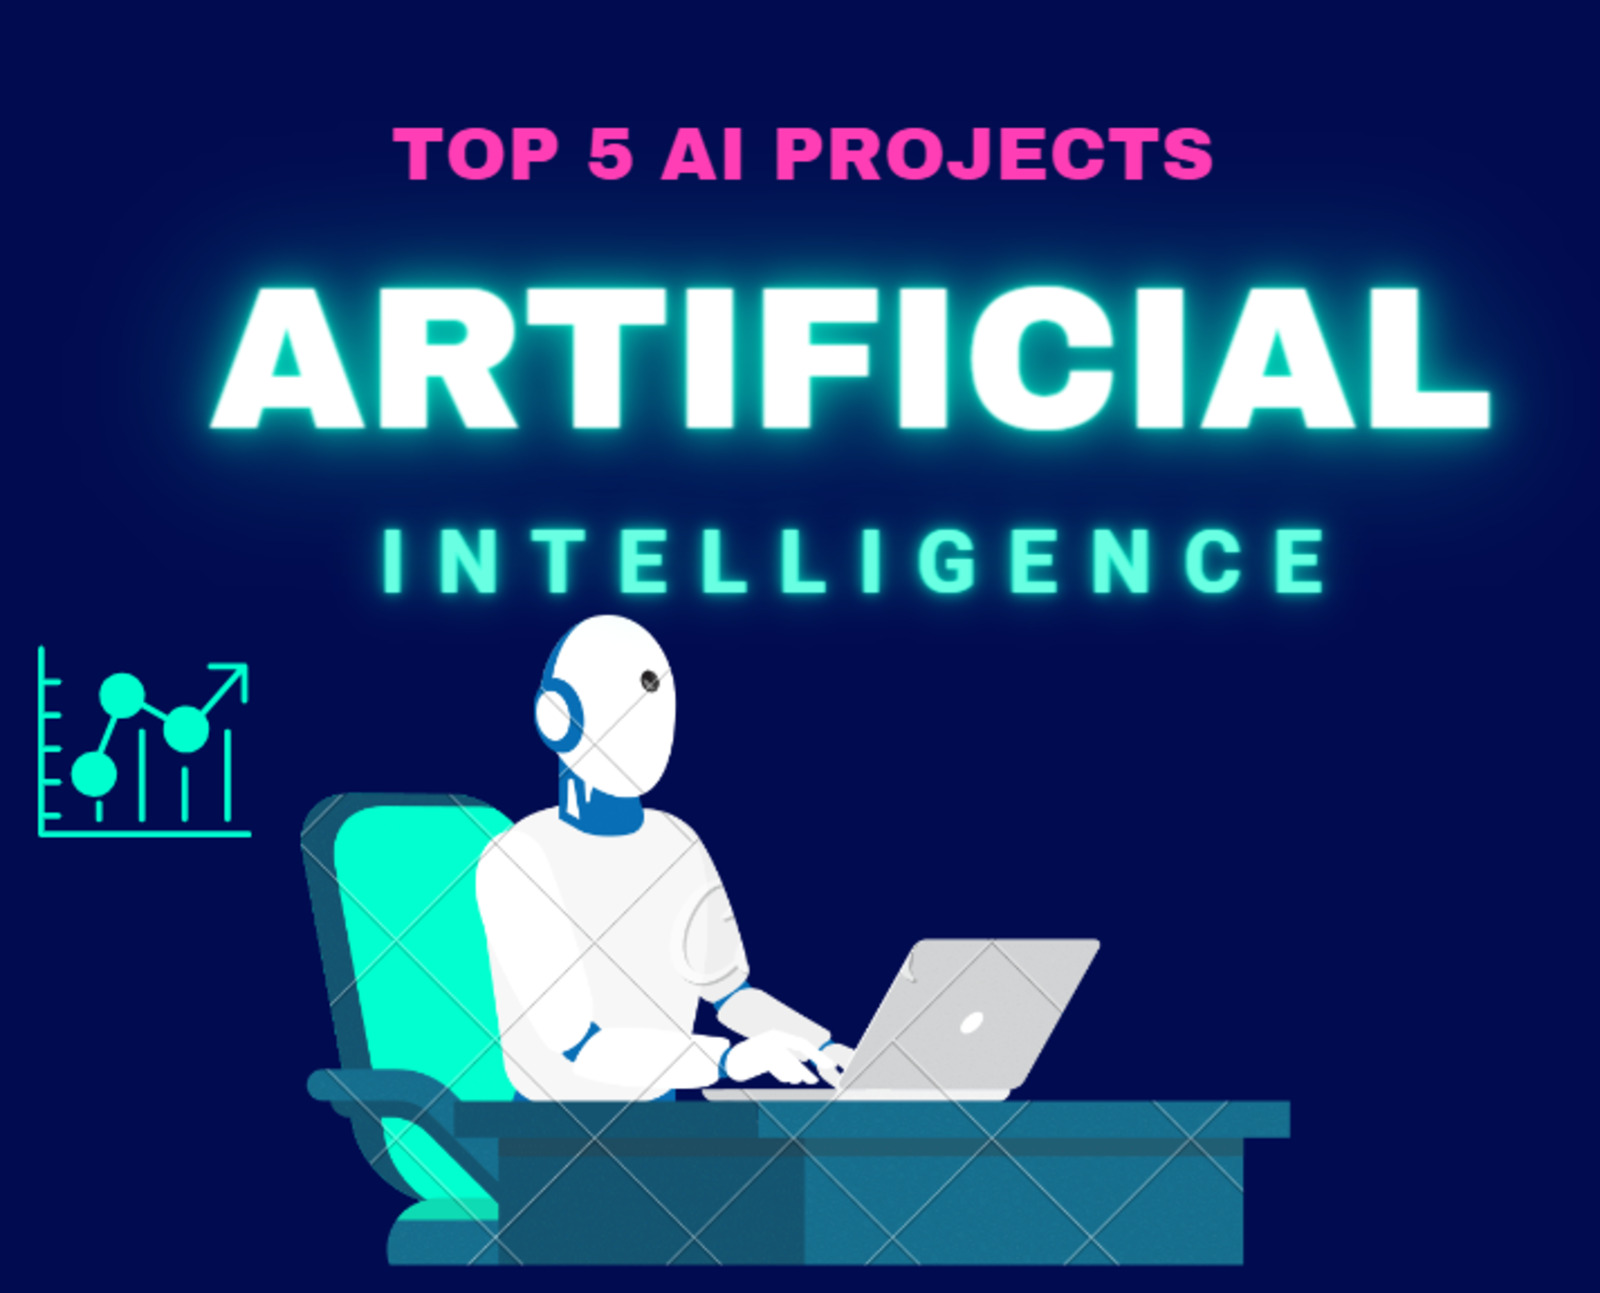 Top 5 high potential AI Projects to turn $1,000 into $100,000